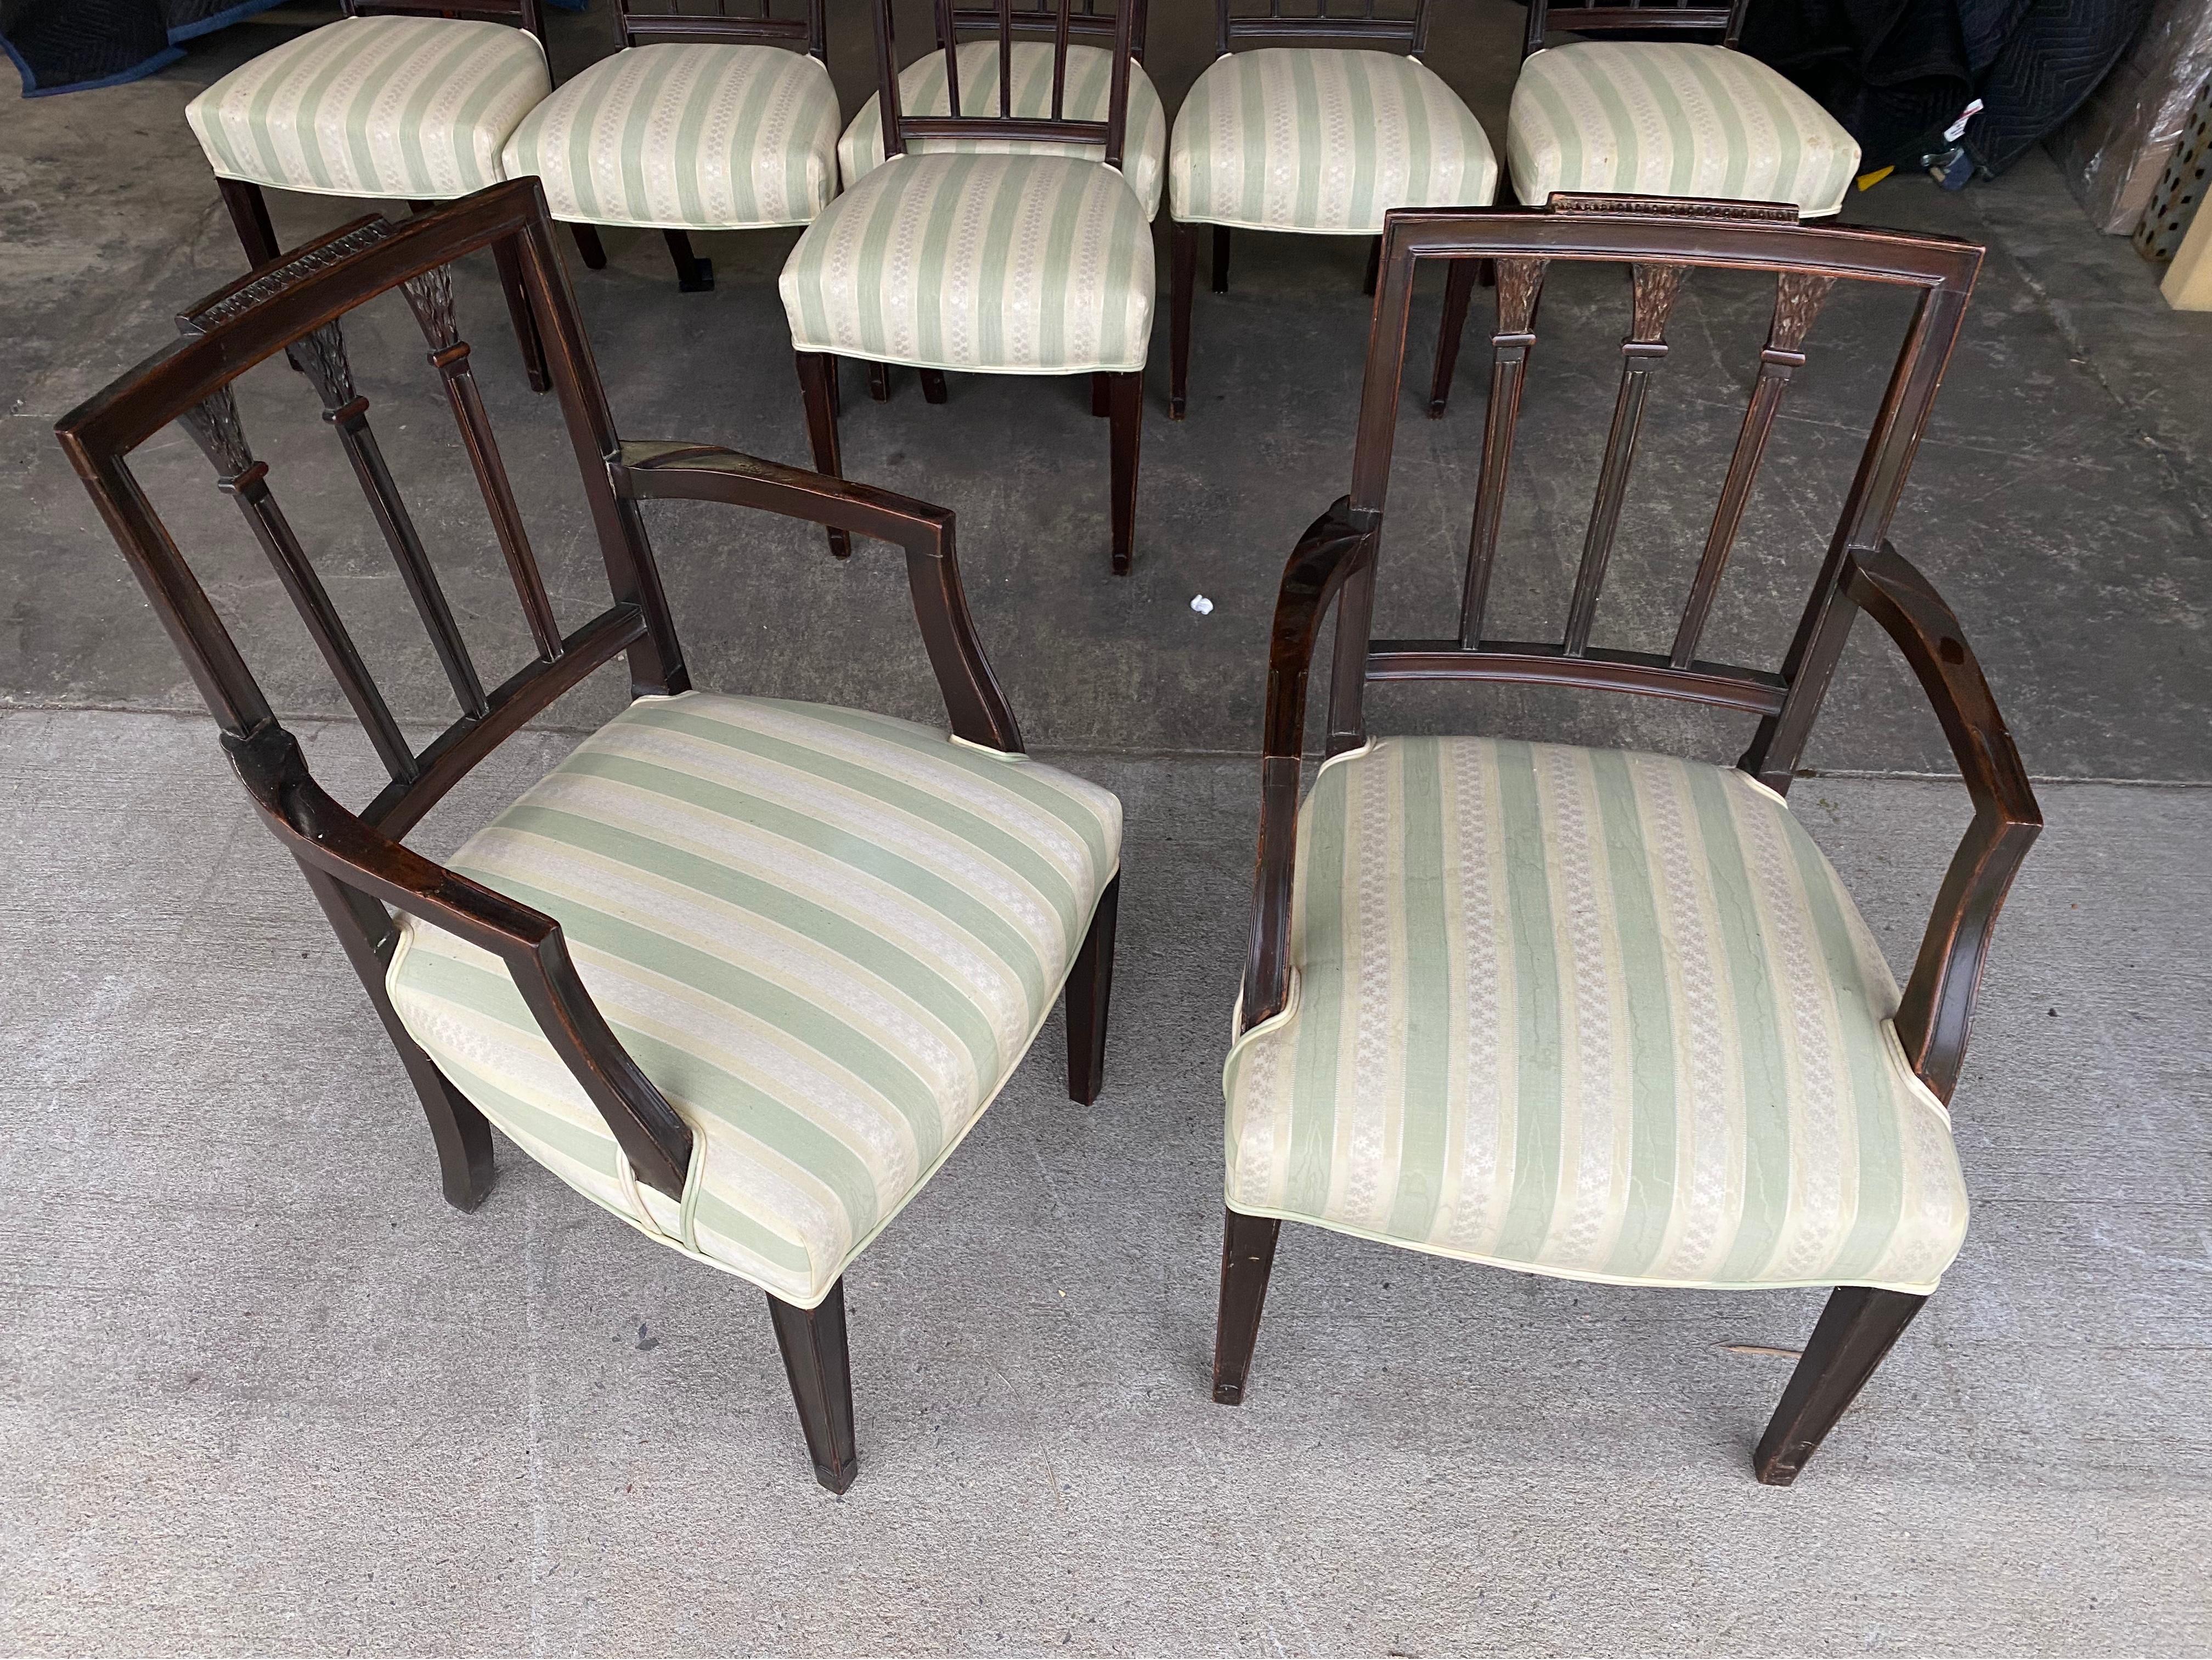 Great set of 8 19th century English mahogany dining chairs. Two arm chairs and six side chairs. All in good condition. Upholstery has a few spots and could be redone or have covers made. 

Measures: Side chairs- 35 height x 19 width x 20.5